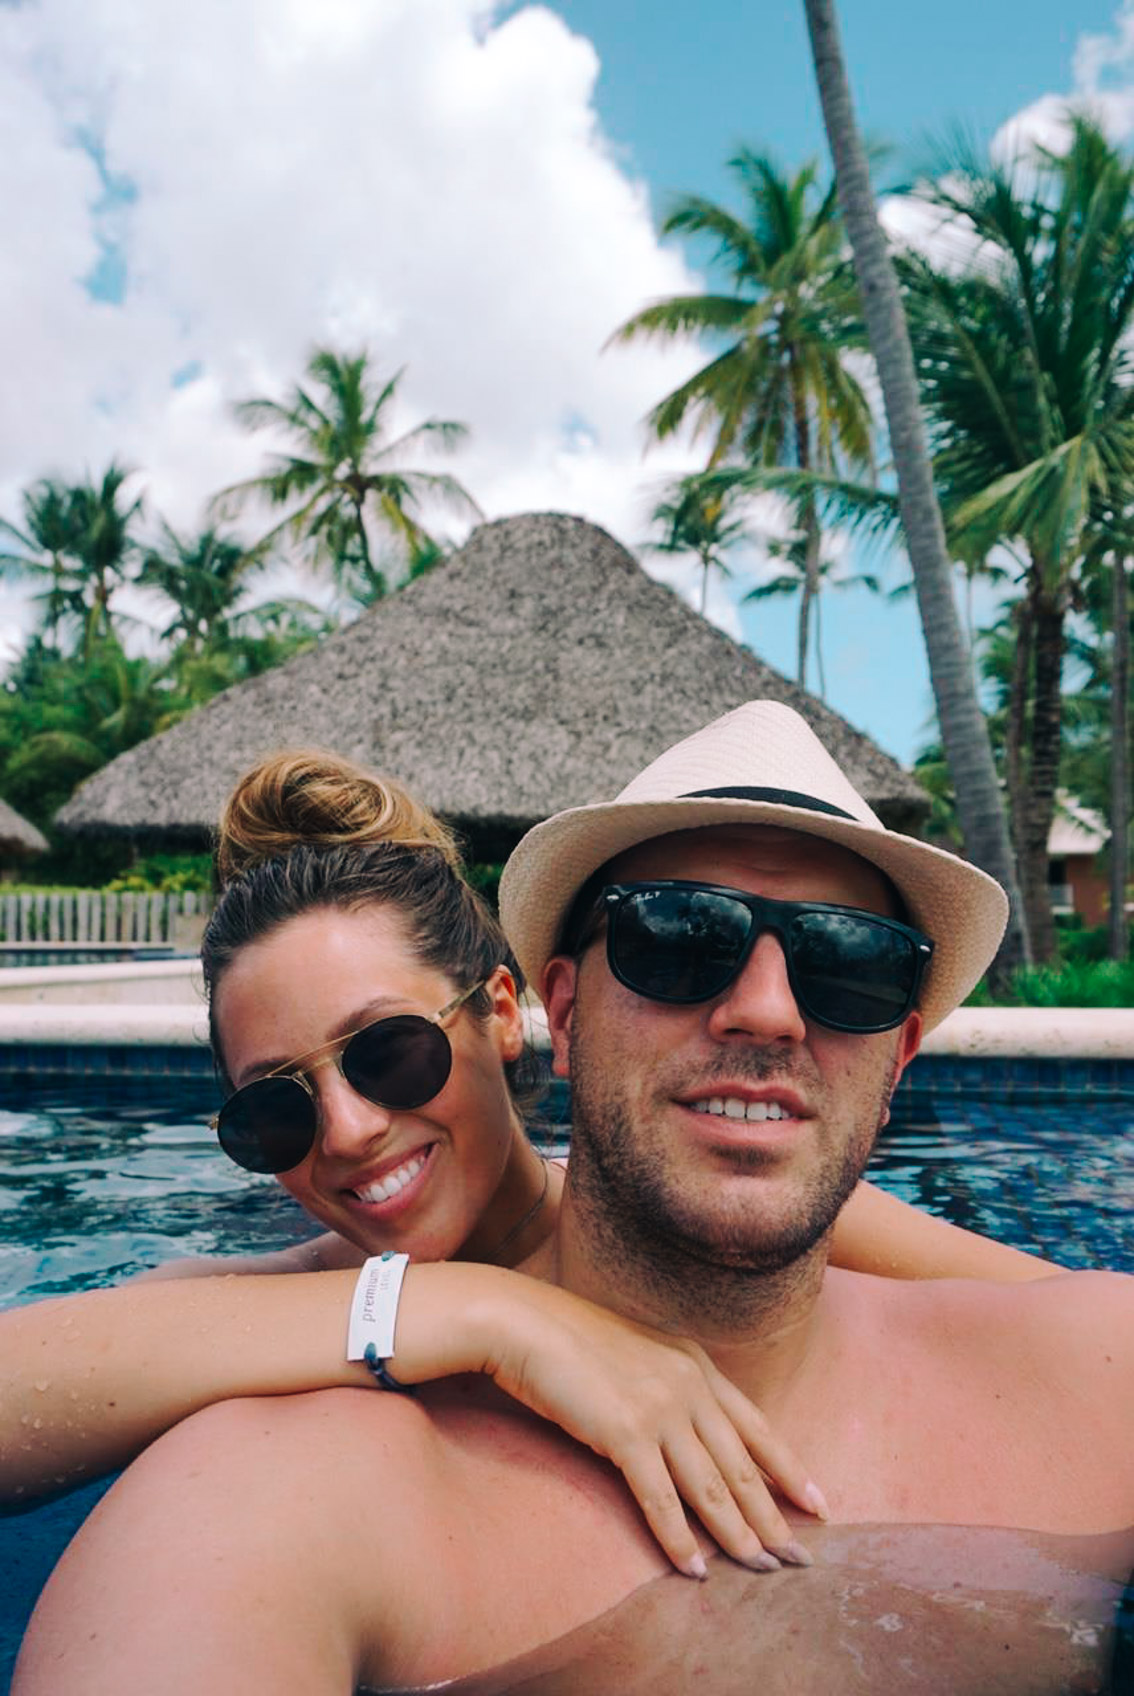 Pittsburgh Life & Style Blogger, Jenna Boron of Balance and Chaos, recaps and reviews her trip to The Barcelo Bavaro Grand Resort in Punta Cana